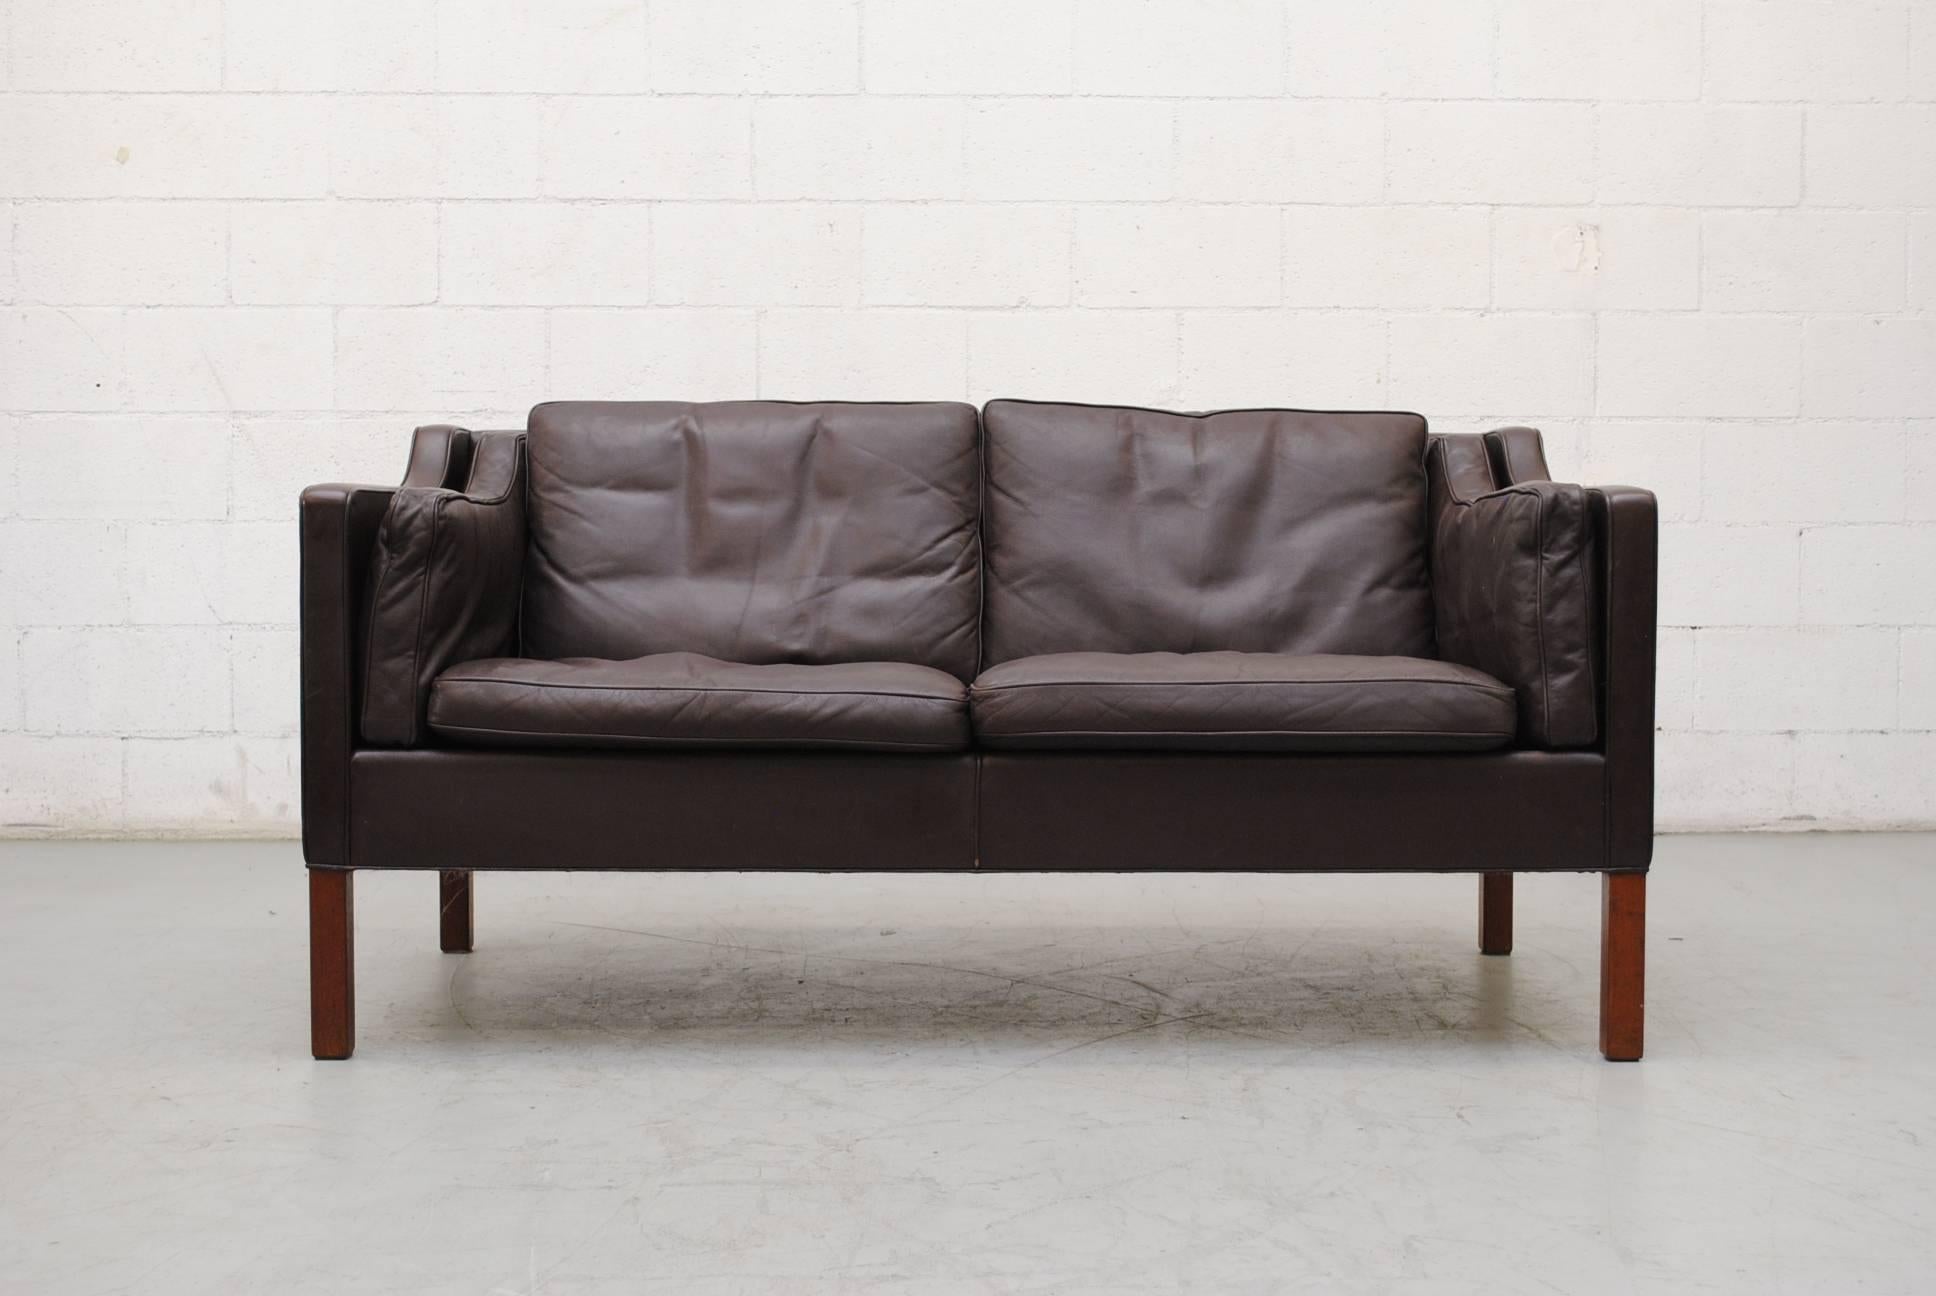 Nice chocolate brown leather Borge Mogensen loveseat. Square wood legs. Good original condition, Wear consistent with its age and usage.